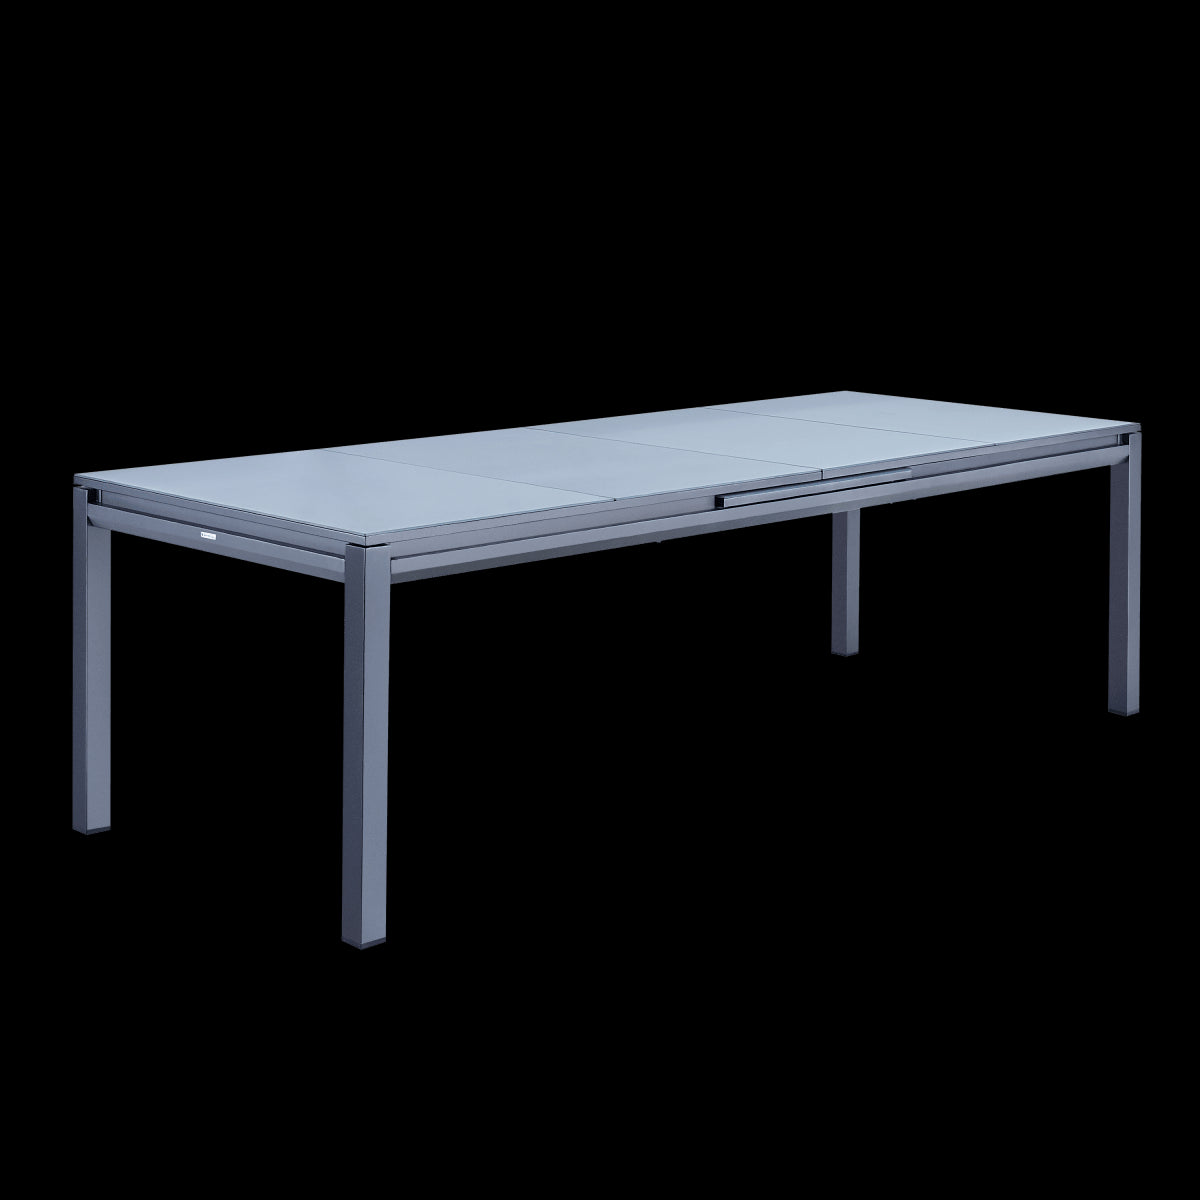 TABLE ODYSSEA II EASY NATERIAL 256/320X100 ANTHRACITE ALUMINIUM GLASS